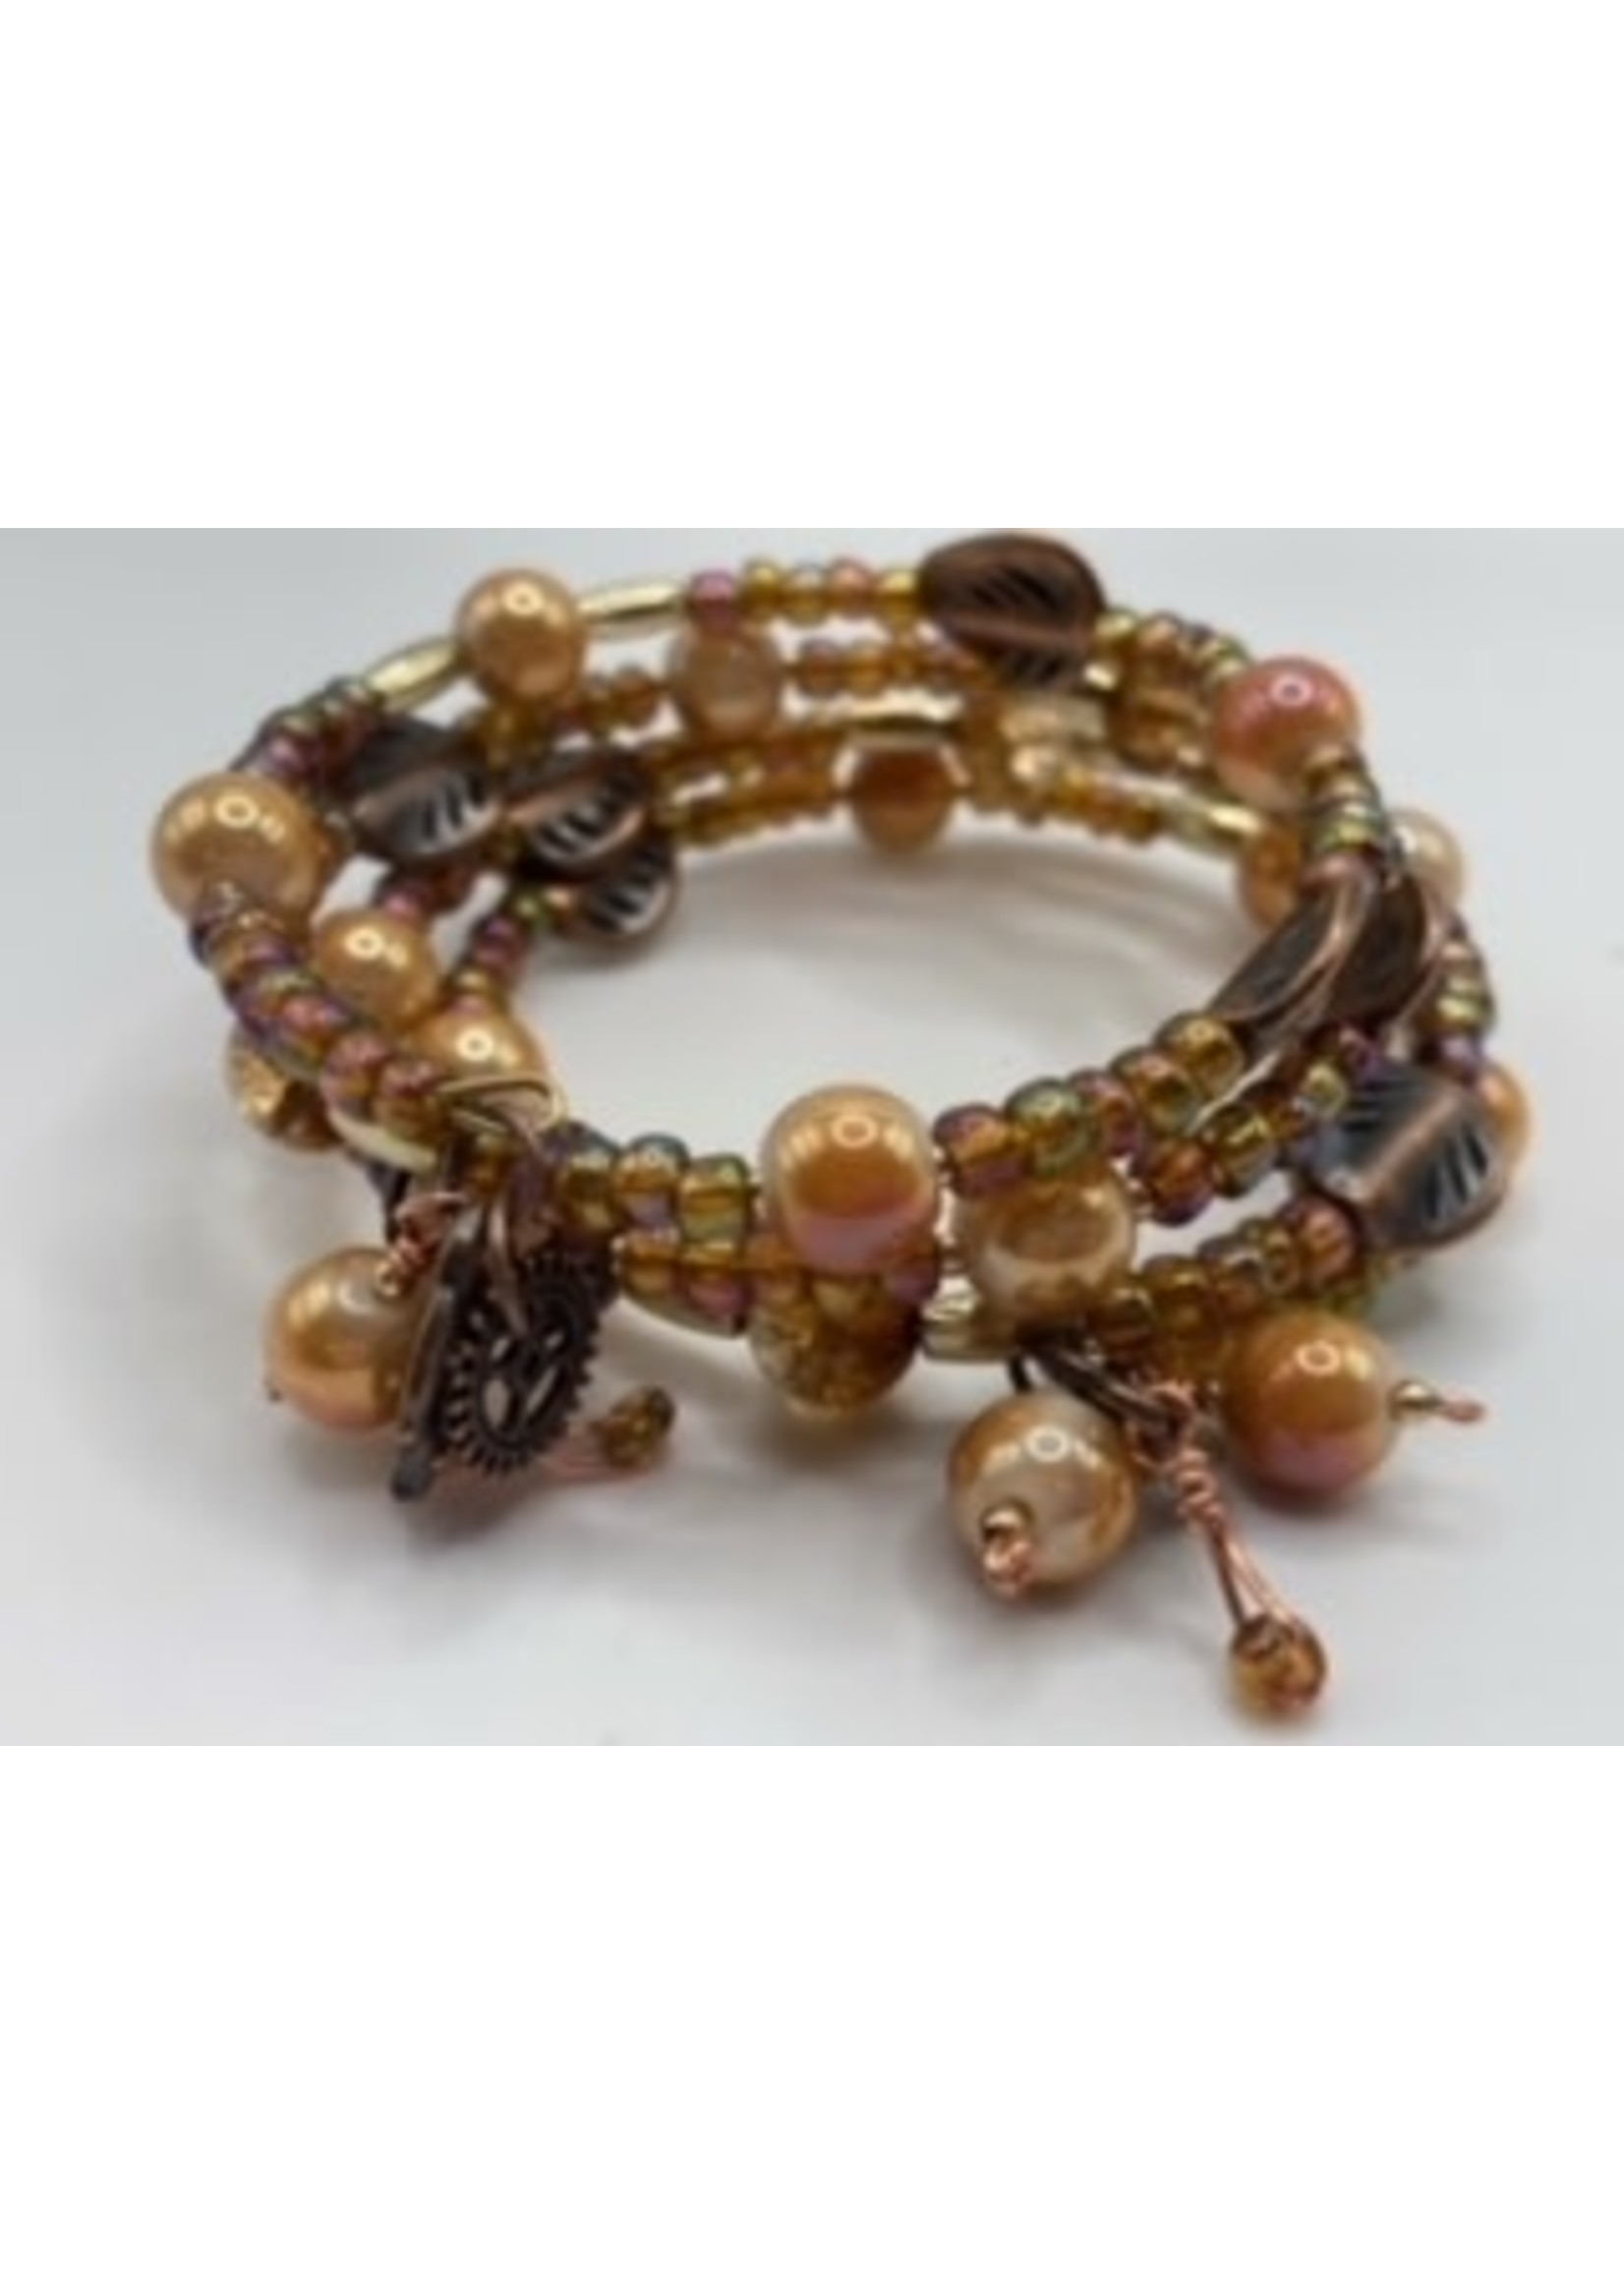 Our Twisted Dahlia 3 Wrap Bracelet in Iridescent Earth Tone Colors with Bronze leaves